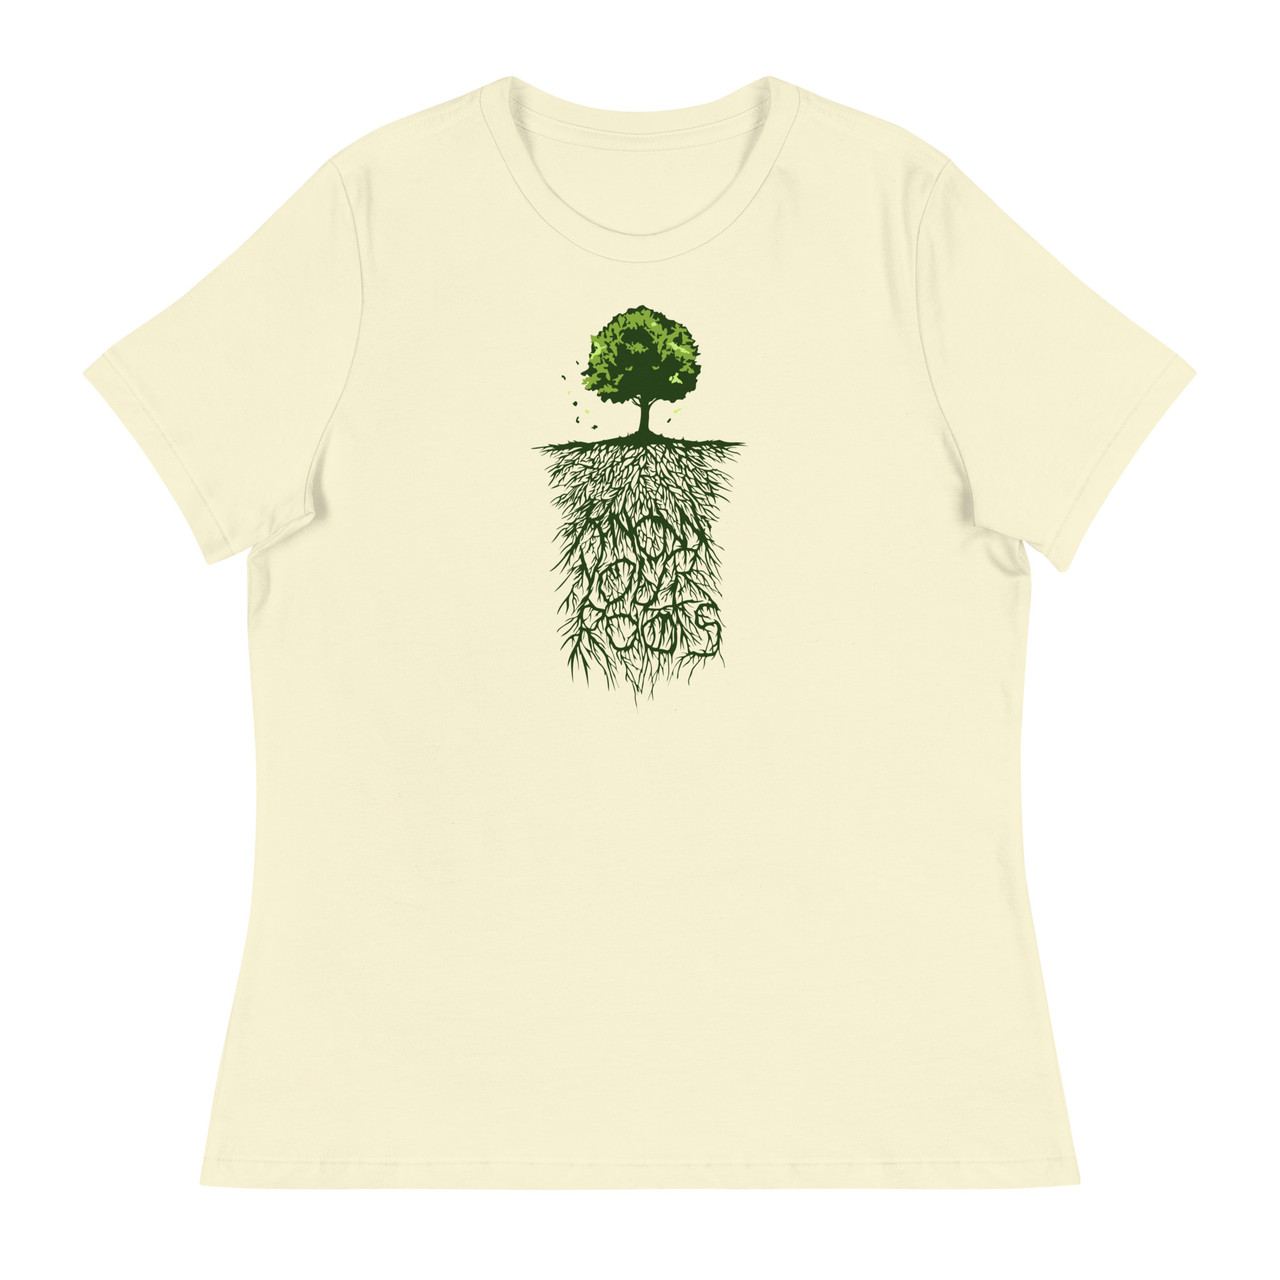 Know Your Roots Women's Relaxed T-Shirt - Bella + Canvas 6400 